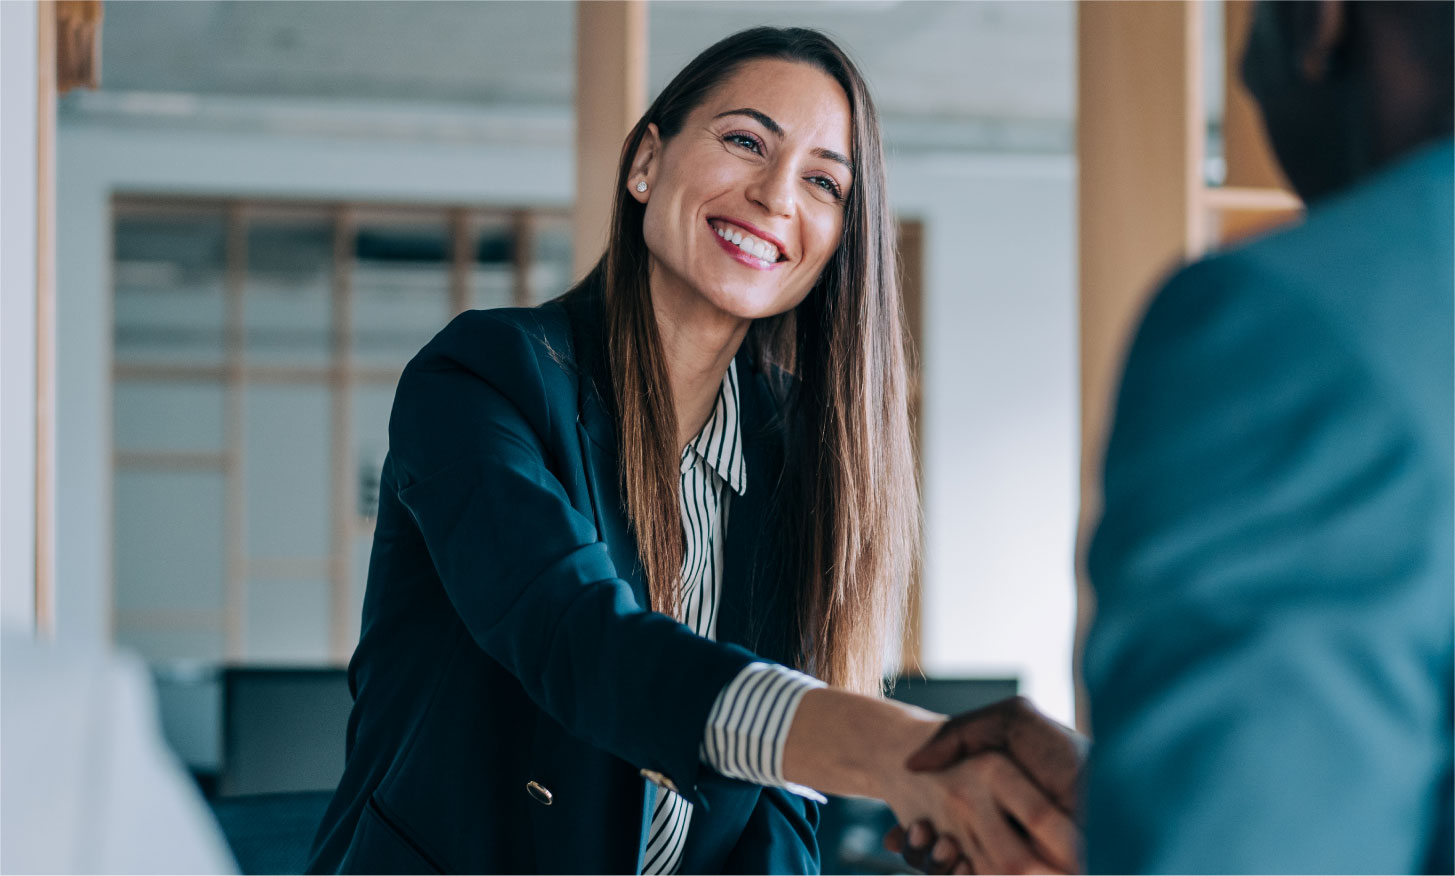 Fidelity Life and Kaplan Professional join forces with new Career connect partnership and scholarship.